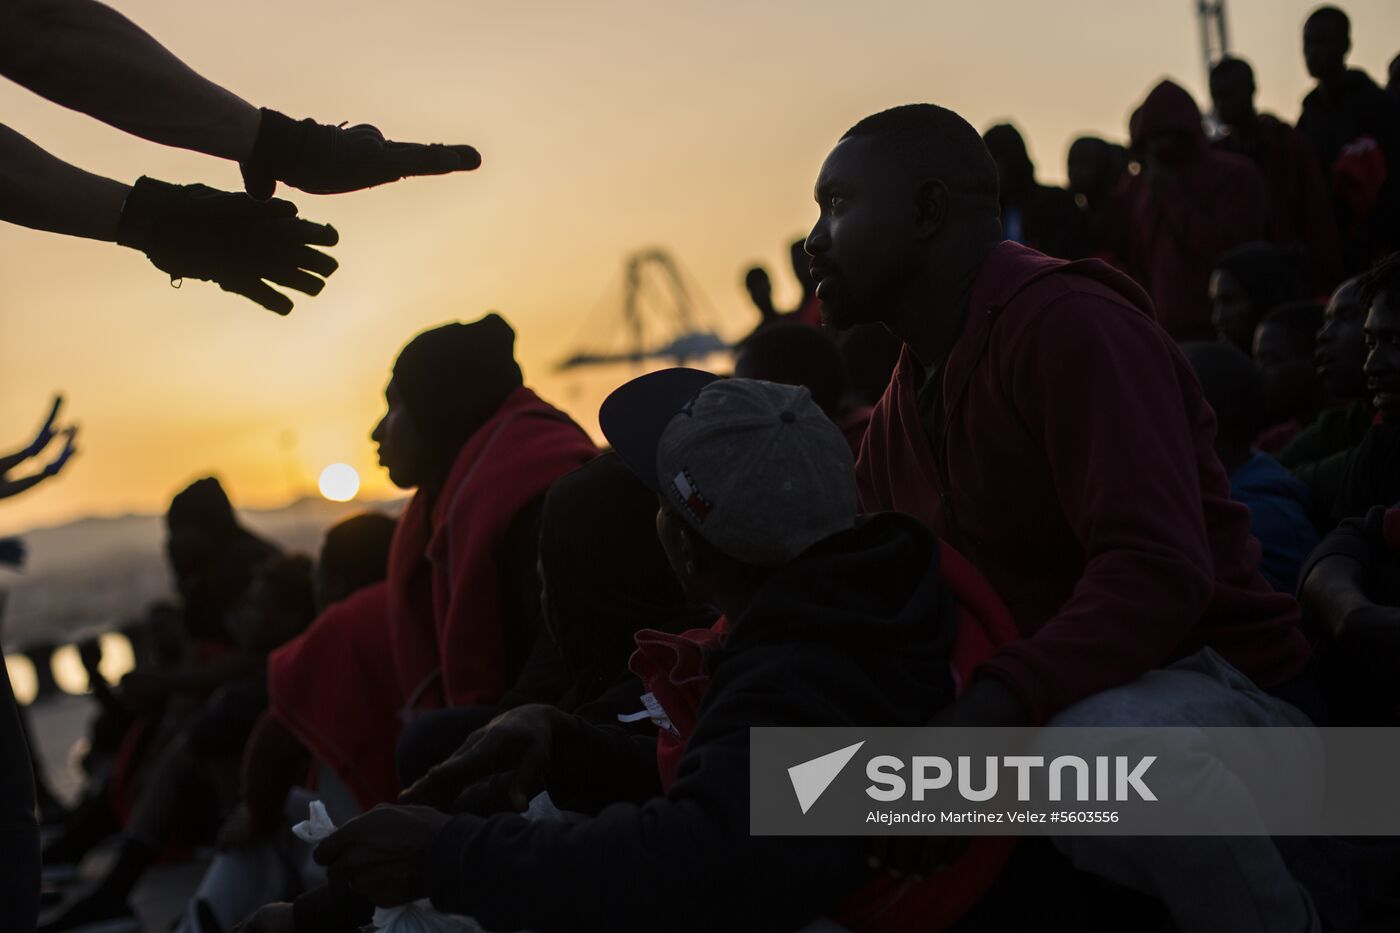 Migrants from Africa and Arab countries land in Spain